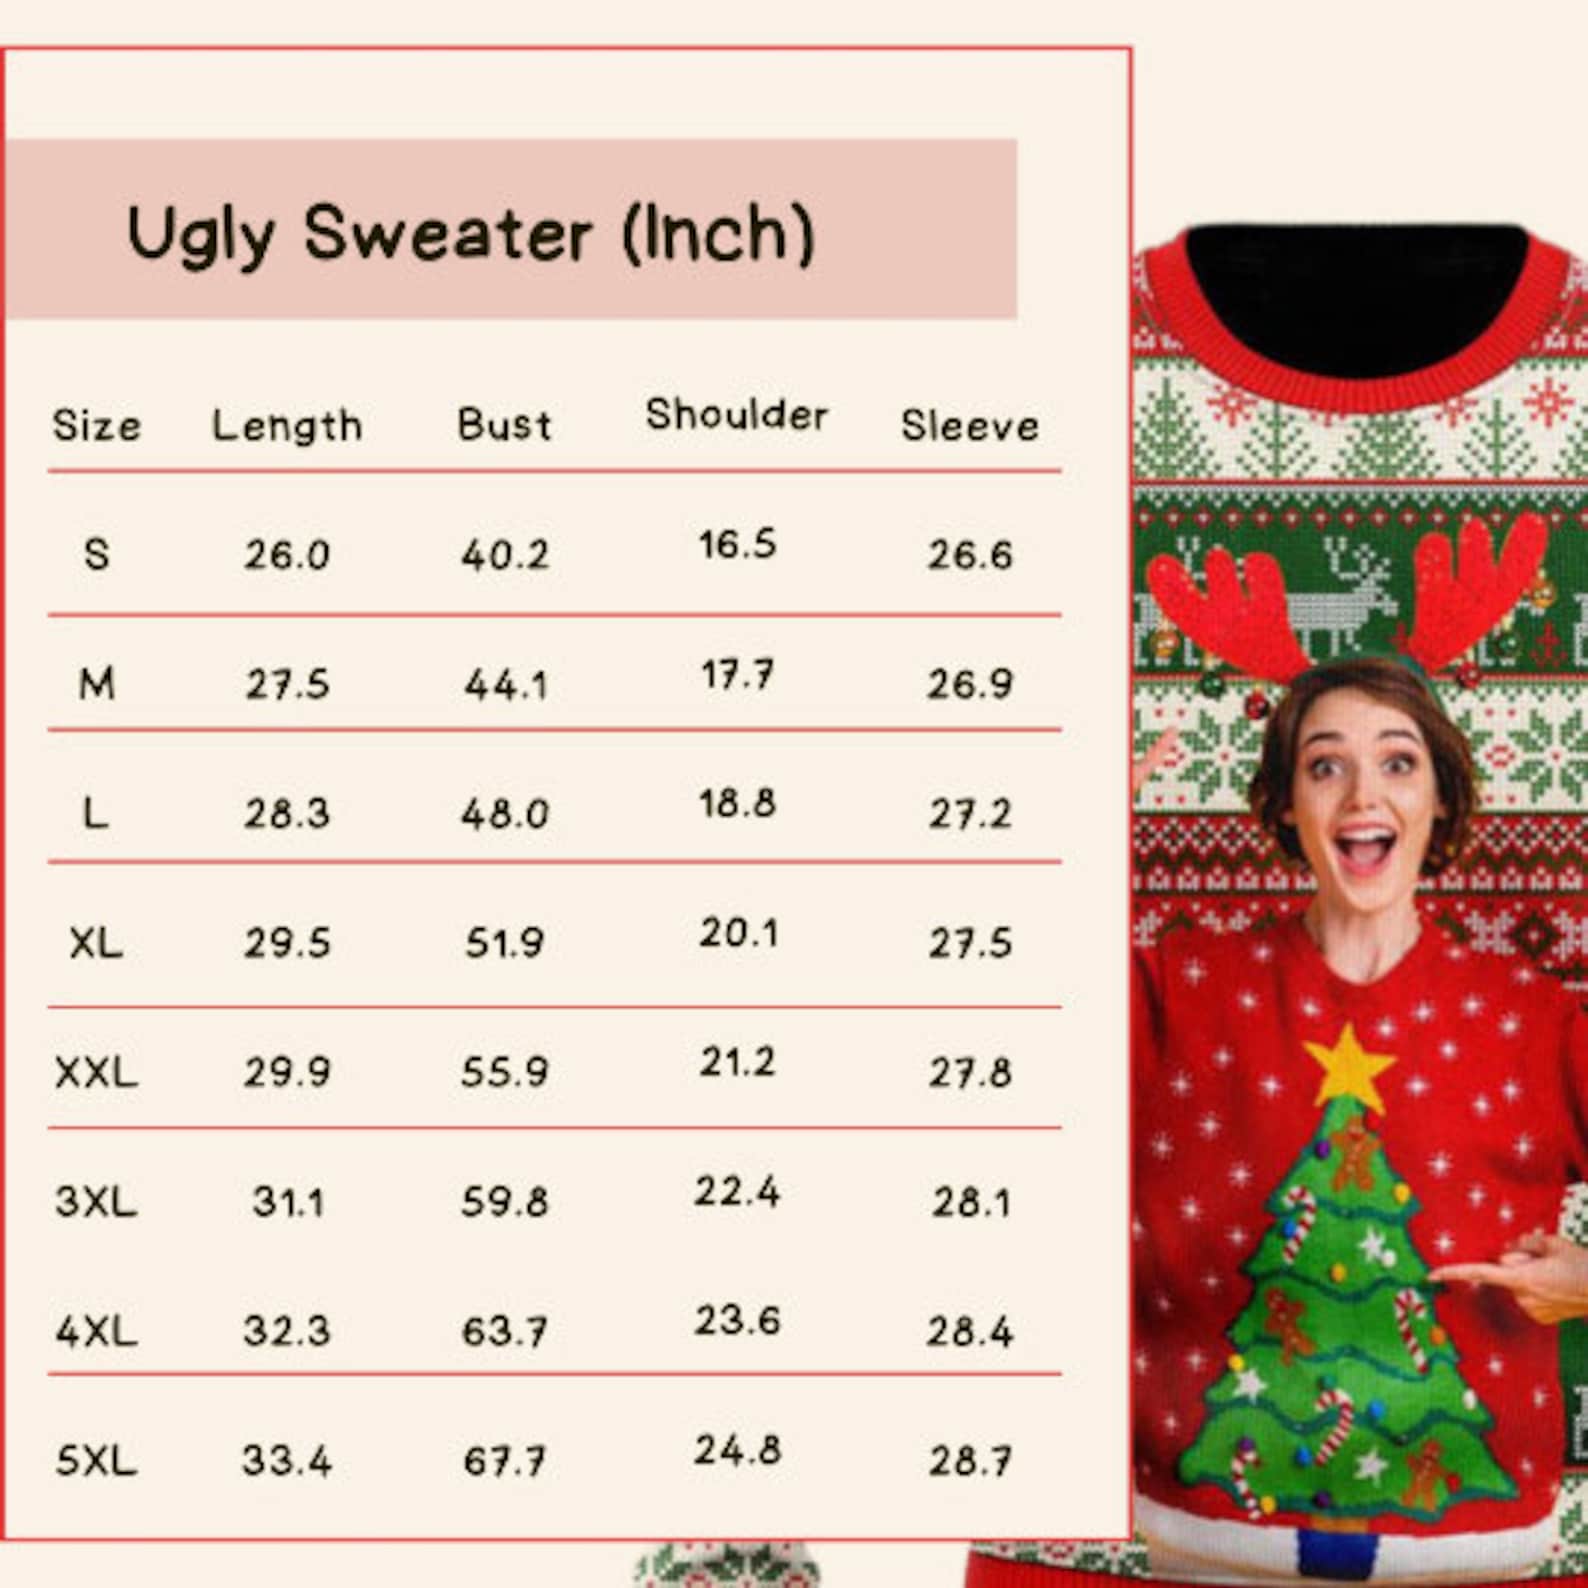 Personalized This Is My Ugly Sweater, Ugly Sweater, Personalized Photo Ugly Sweater, Personalized Sweater, Custom Face Ugly Sweater